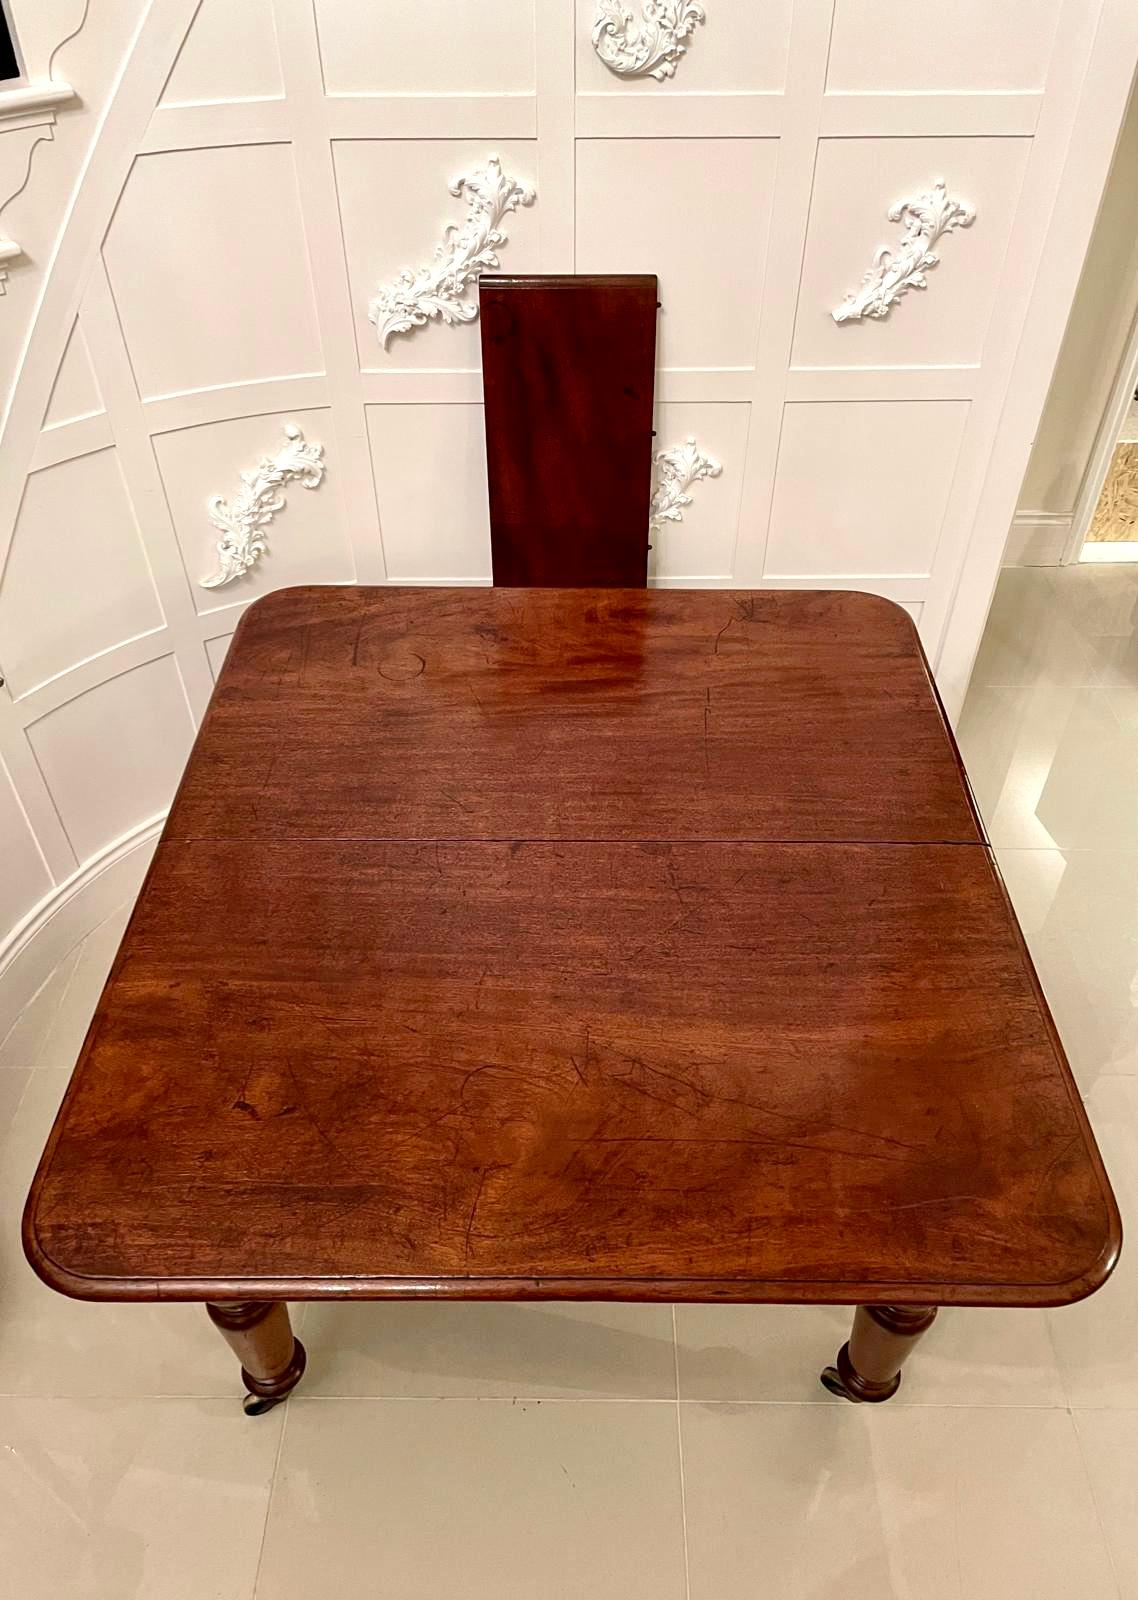 19th century Victorian antique mahogany extending dining table having a quality mahogany extending top with a moulded edge, one large original extra leaf, pull out action and standing on attractive shaped turned legs with original castors.

This